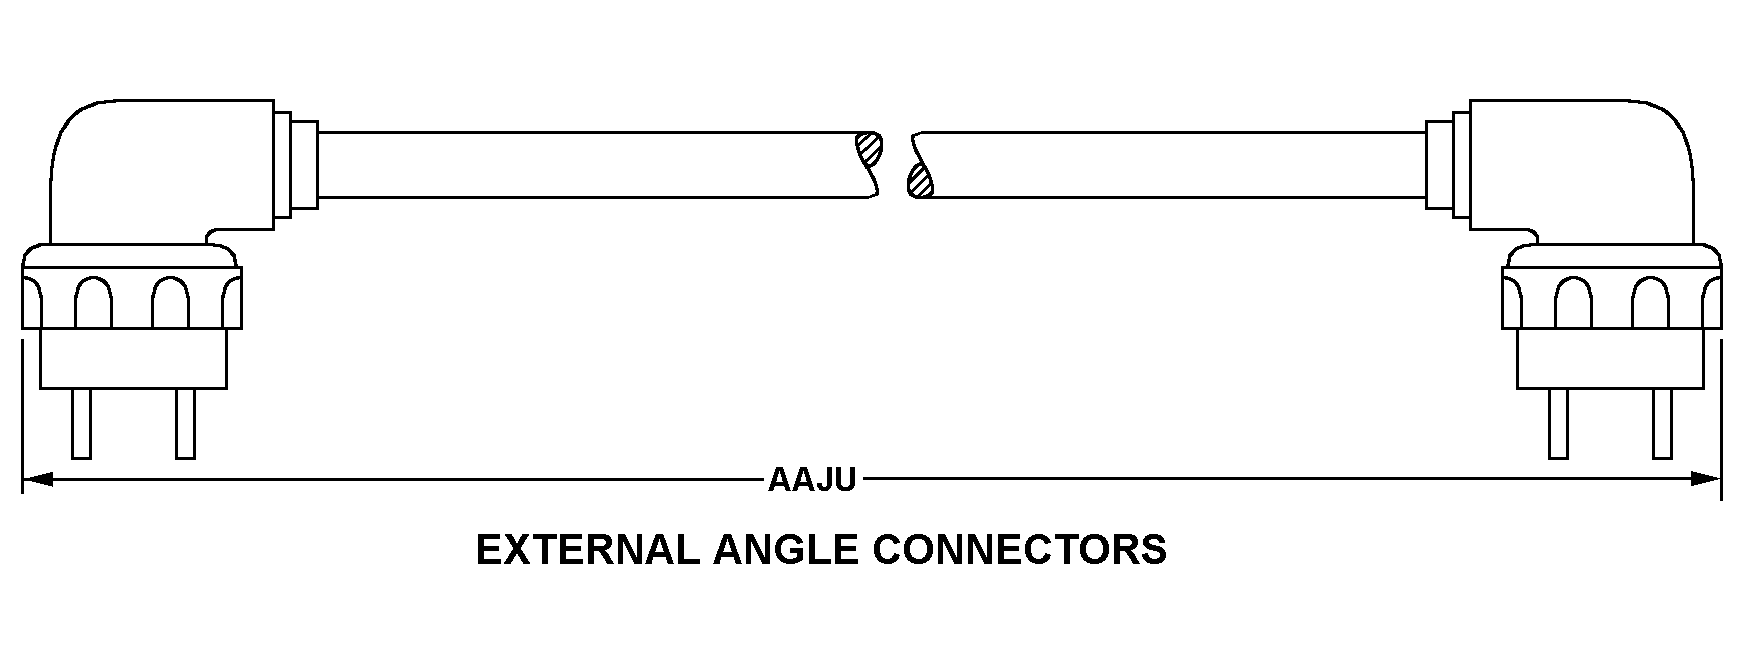 EXTERNAL ANGLE CONNECTORS style nsn 6150-01-282-9459